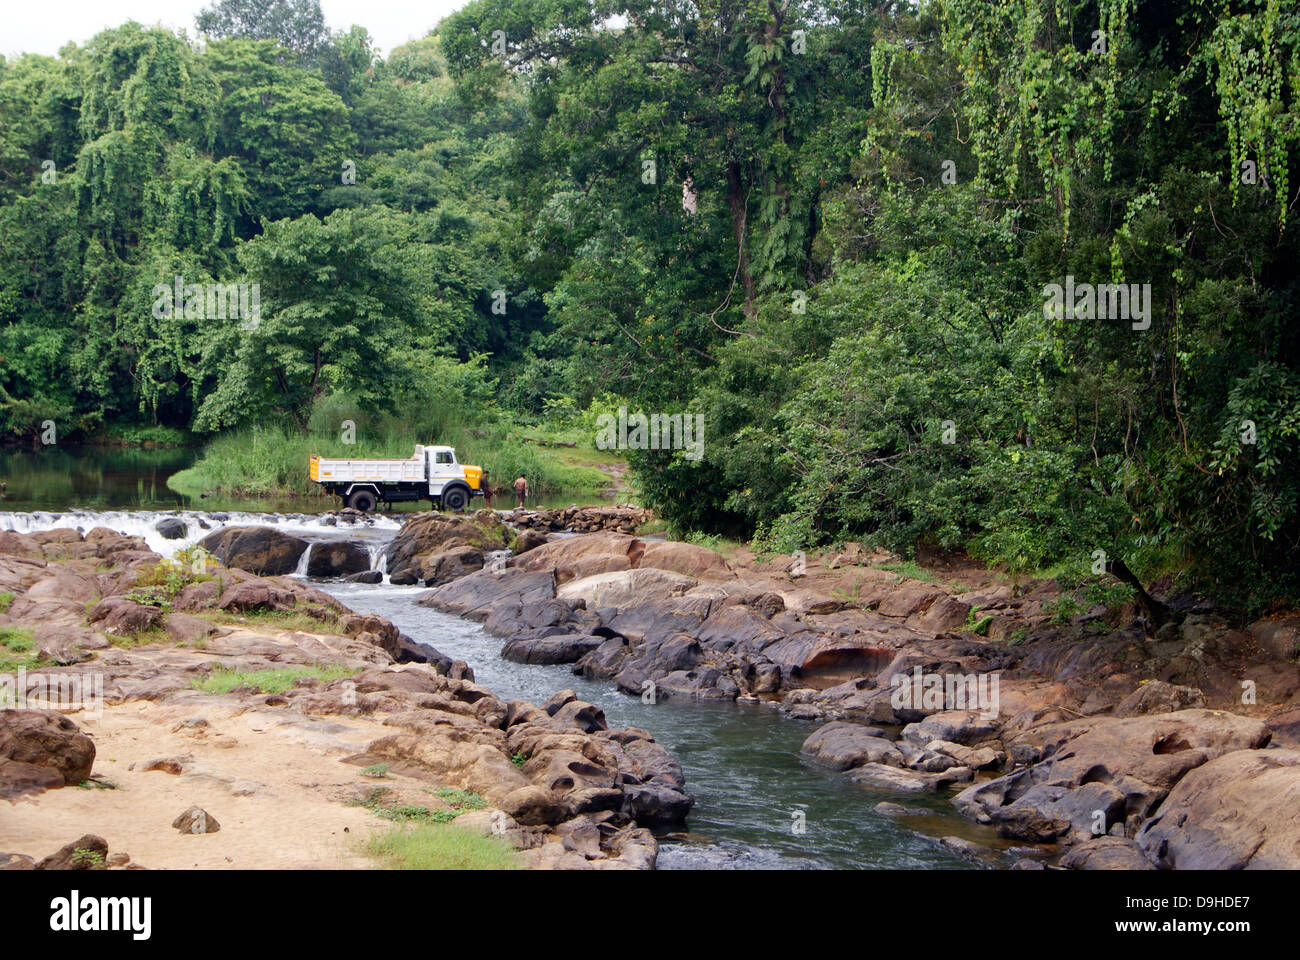 Lorry Washing in the Middle of River Stream on rural Village Outskirts at Kerala India Stock Photo